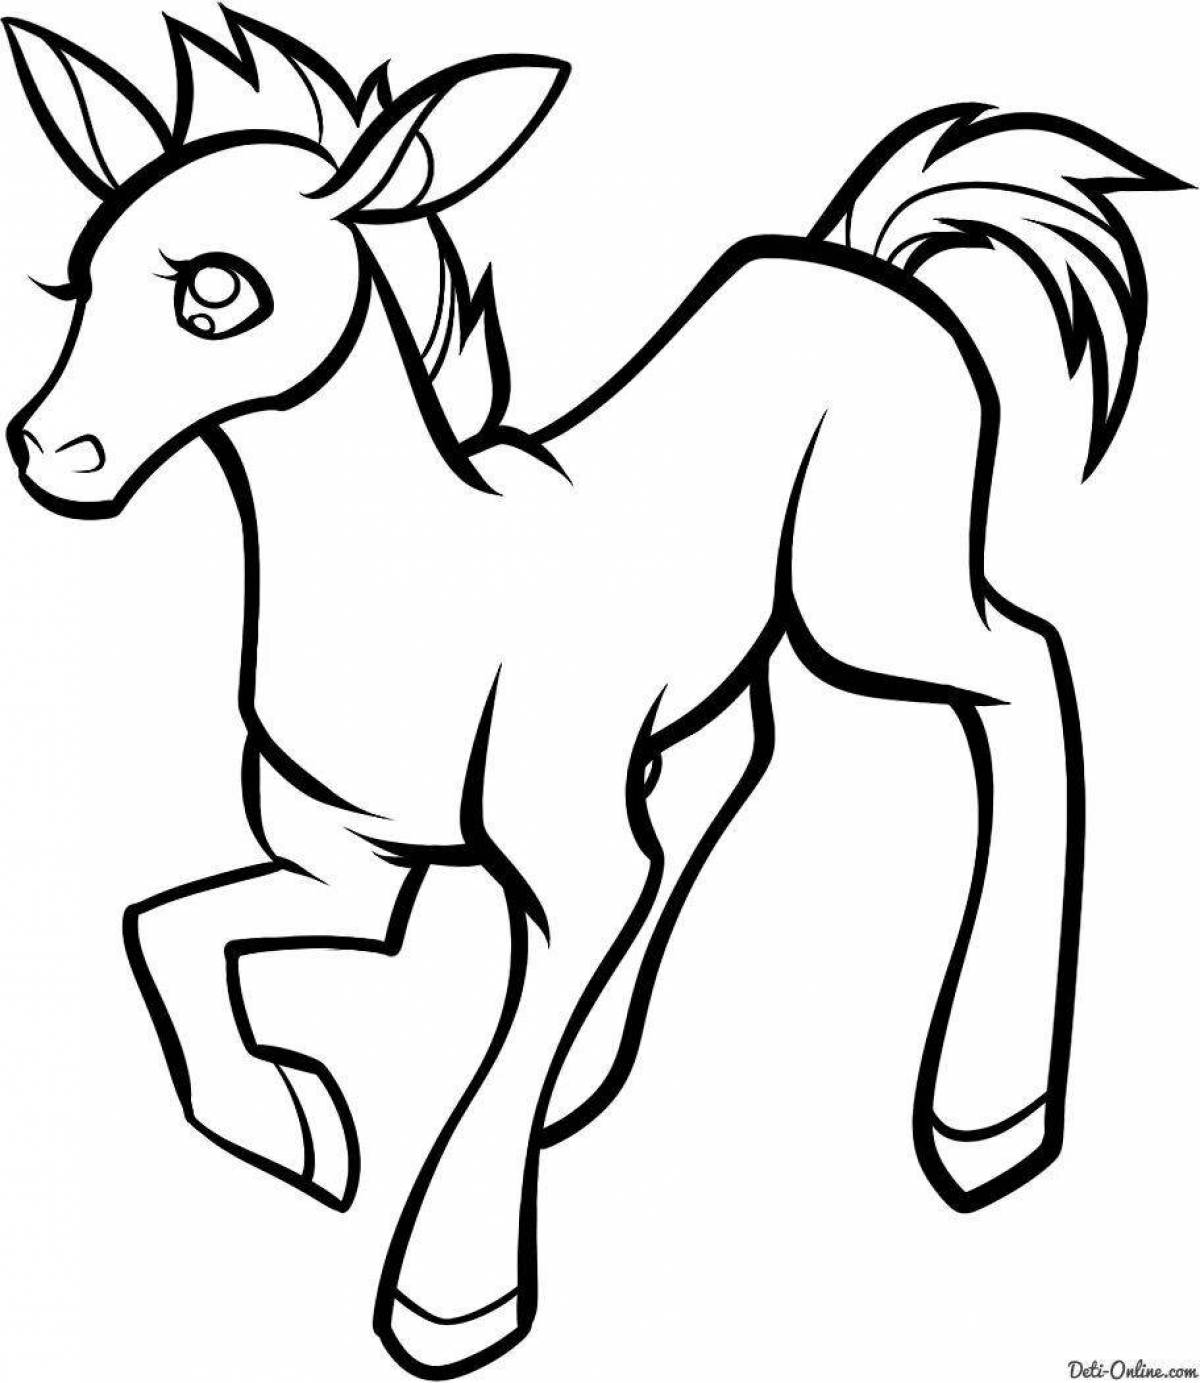 Rampant foal coloring page